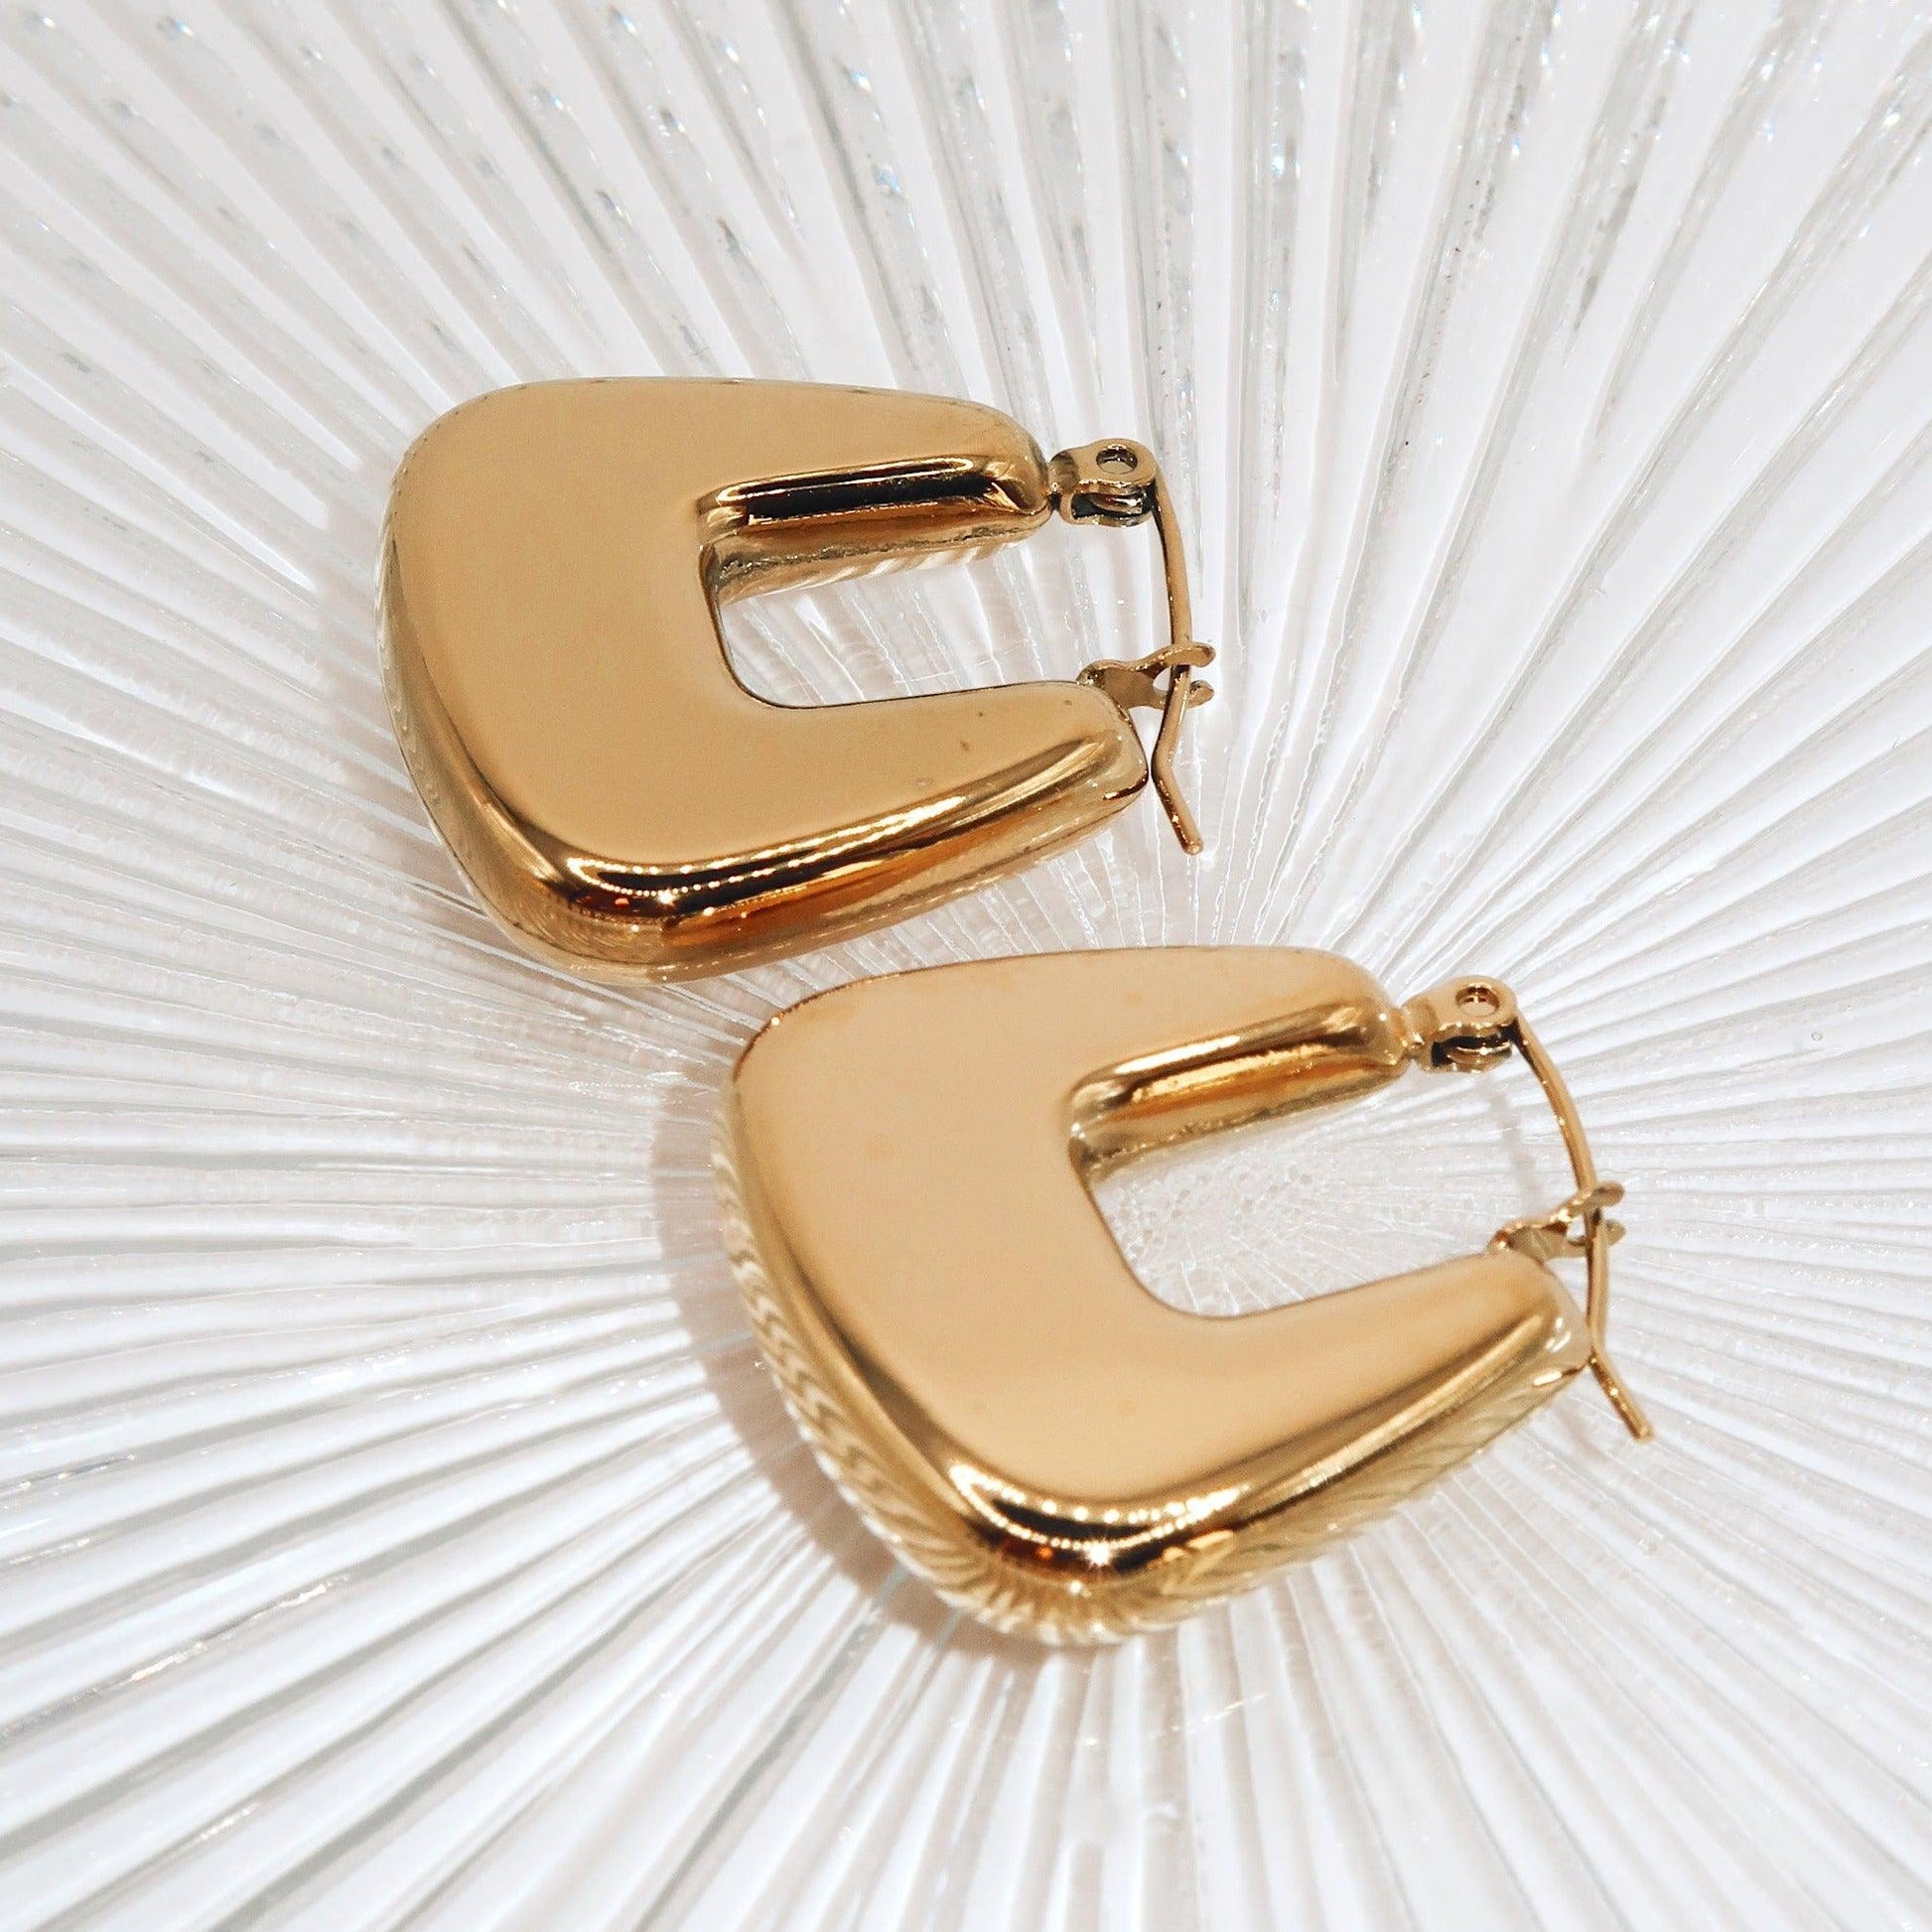 CAMILE - 18K PVD Gold Plated U-Cut Square Hoop Earrings - Mixed Metals